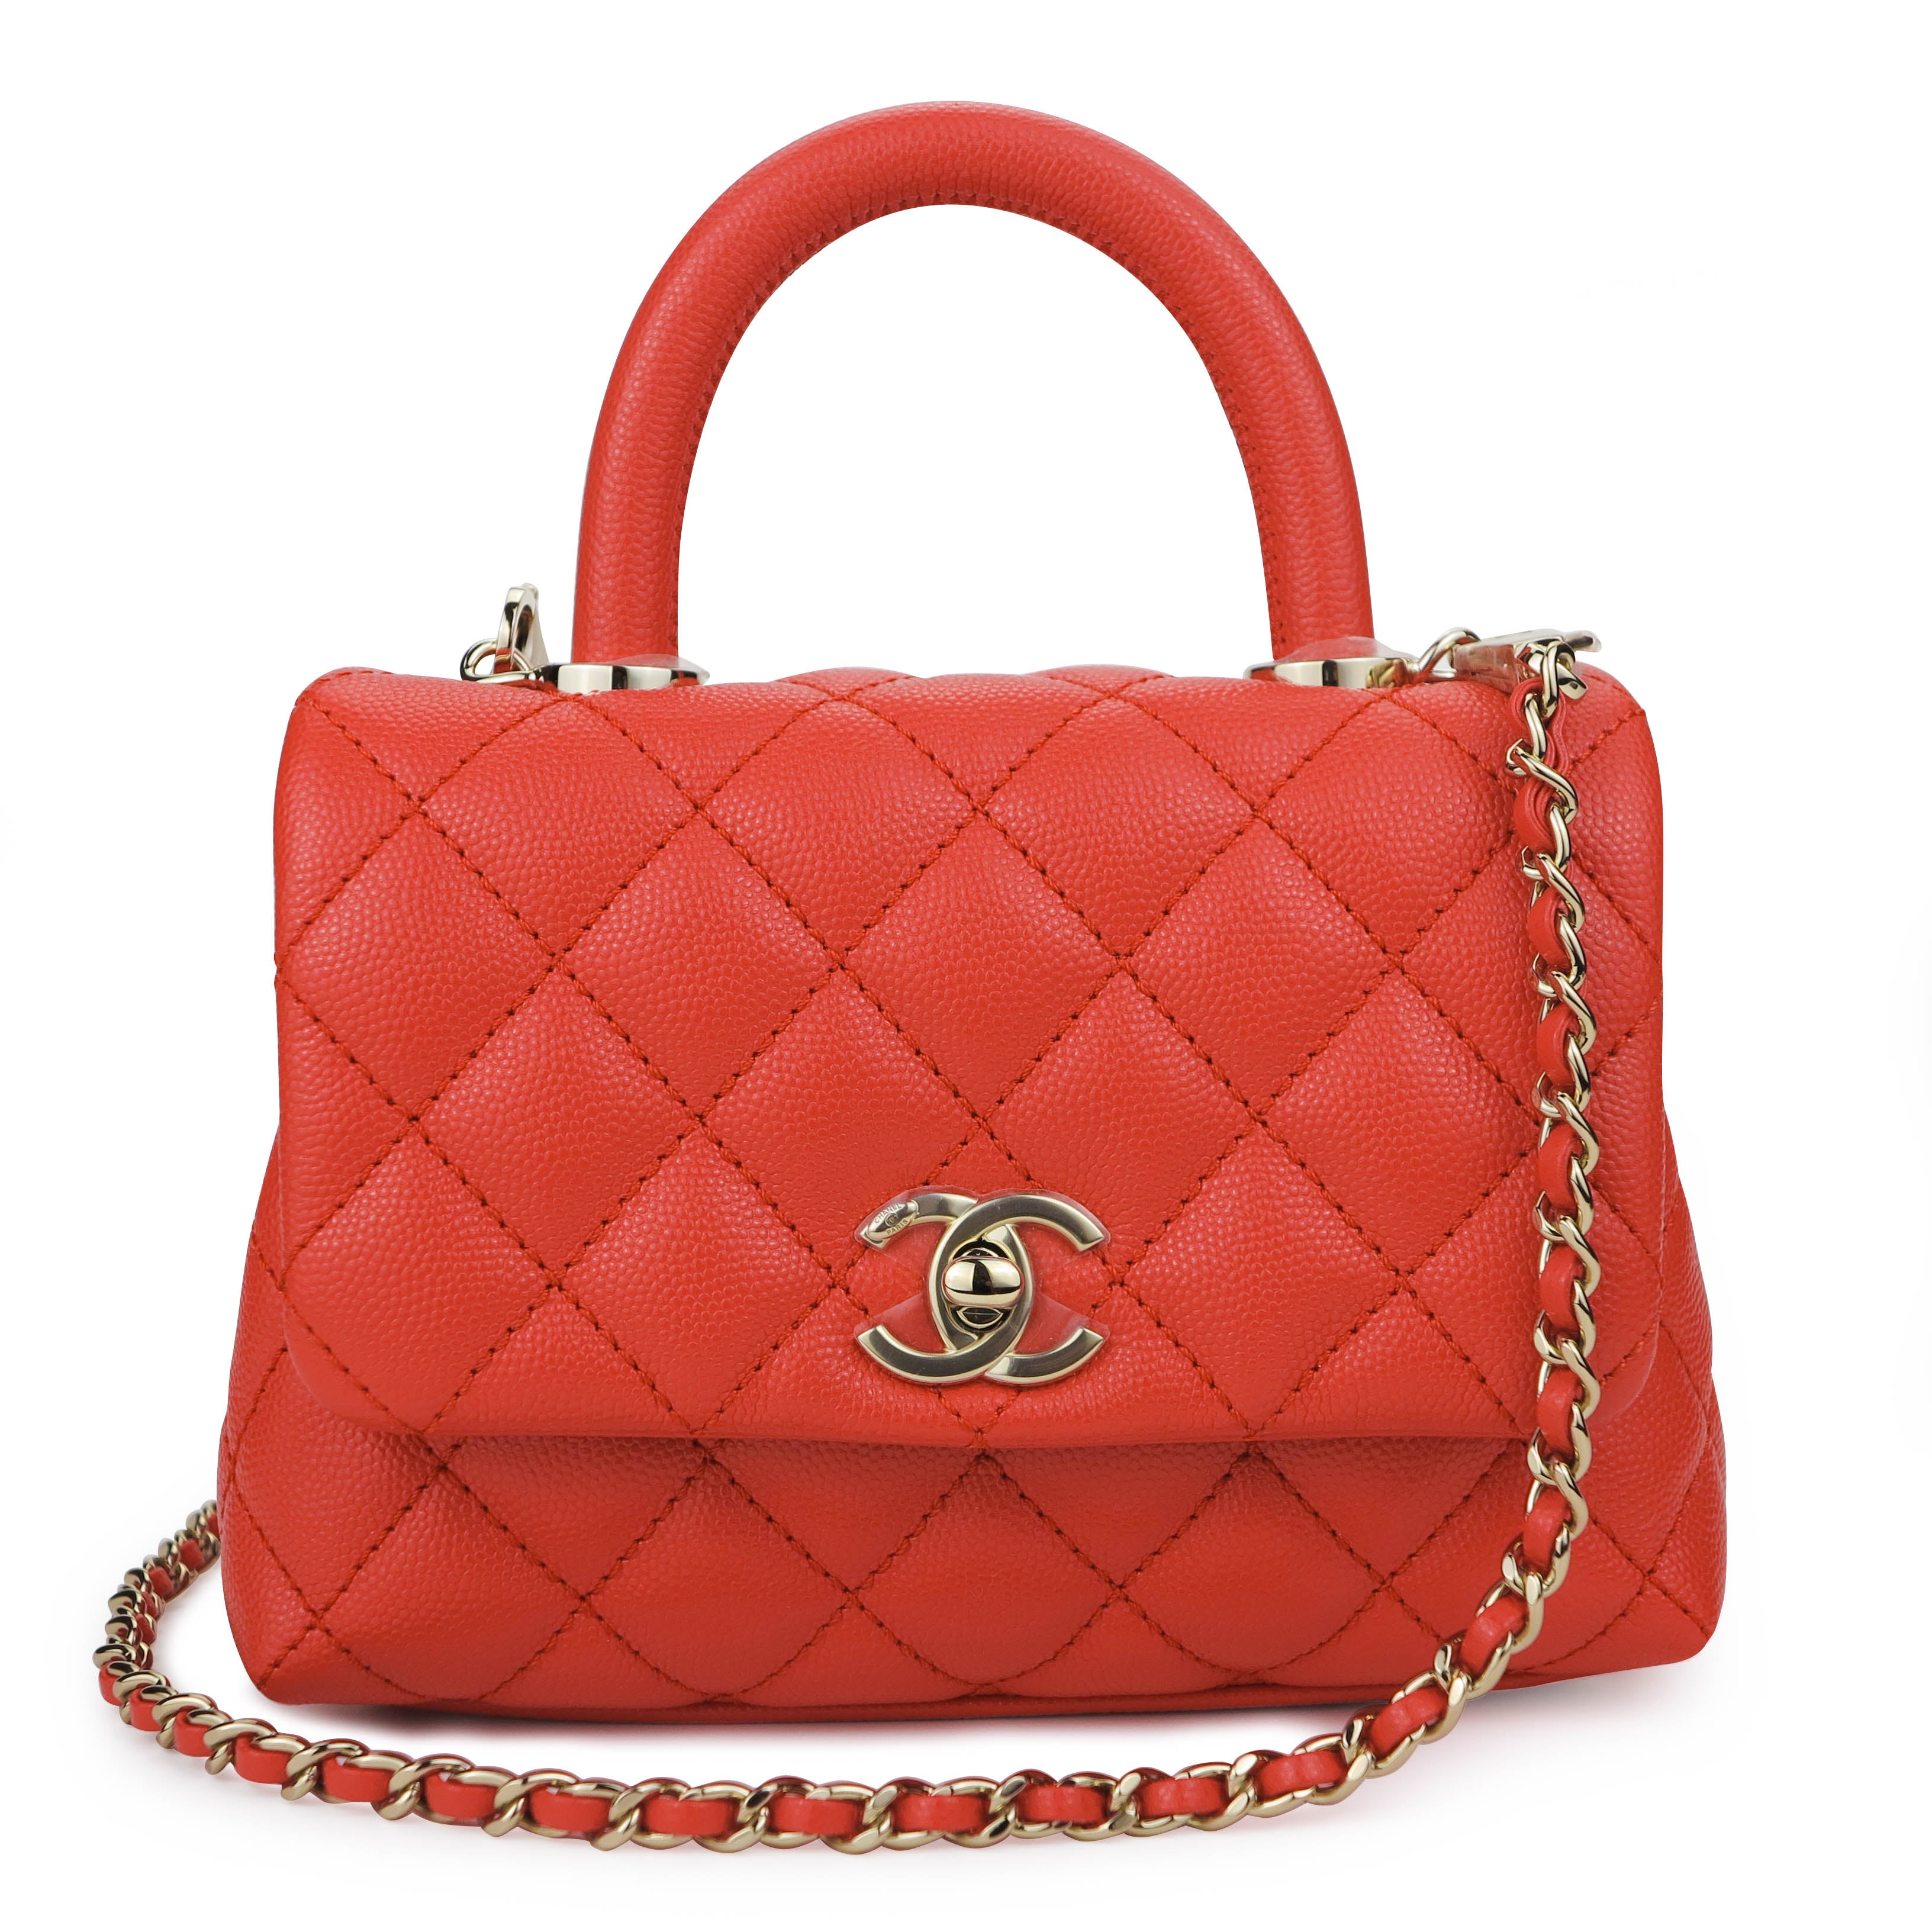 Chanel Coco Top Handle Bag Quilted Caviar Mini Auction